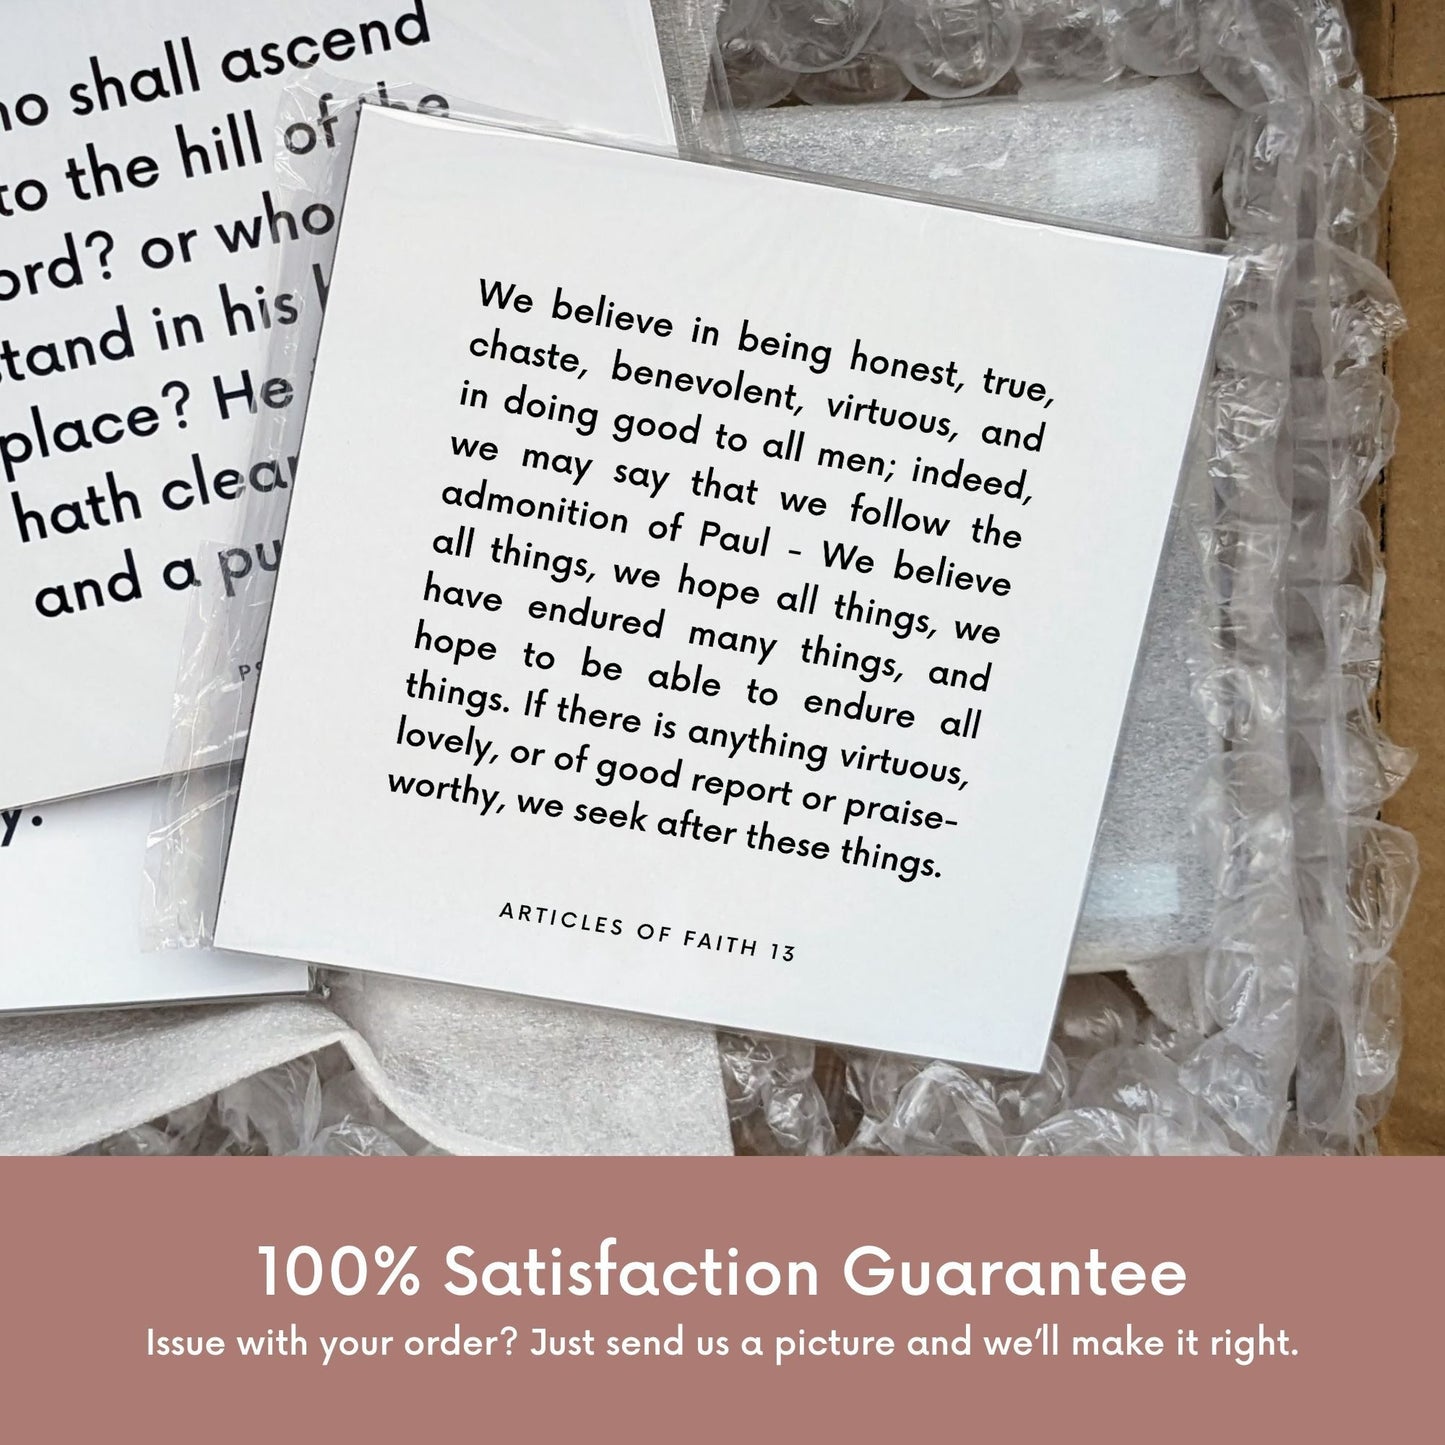 Shipping materials for scripture tile of Articles of Faith 13 - "We believe in being honest, true, chaste, benevolent"